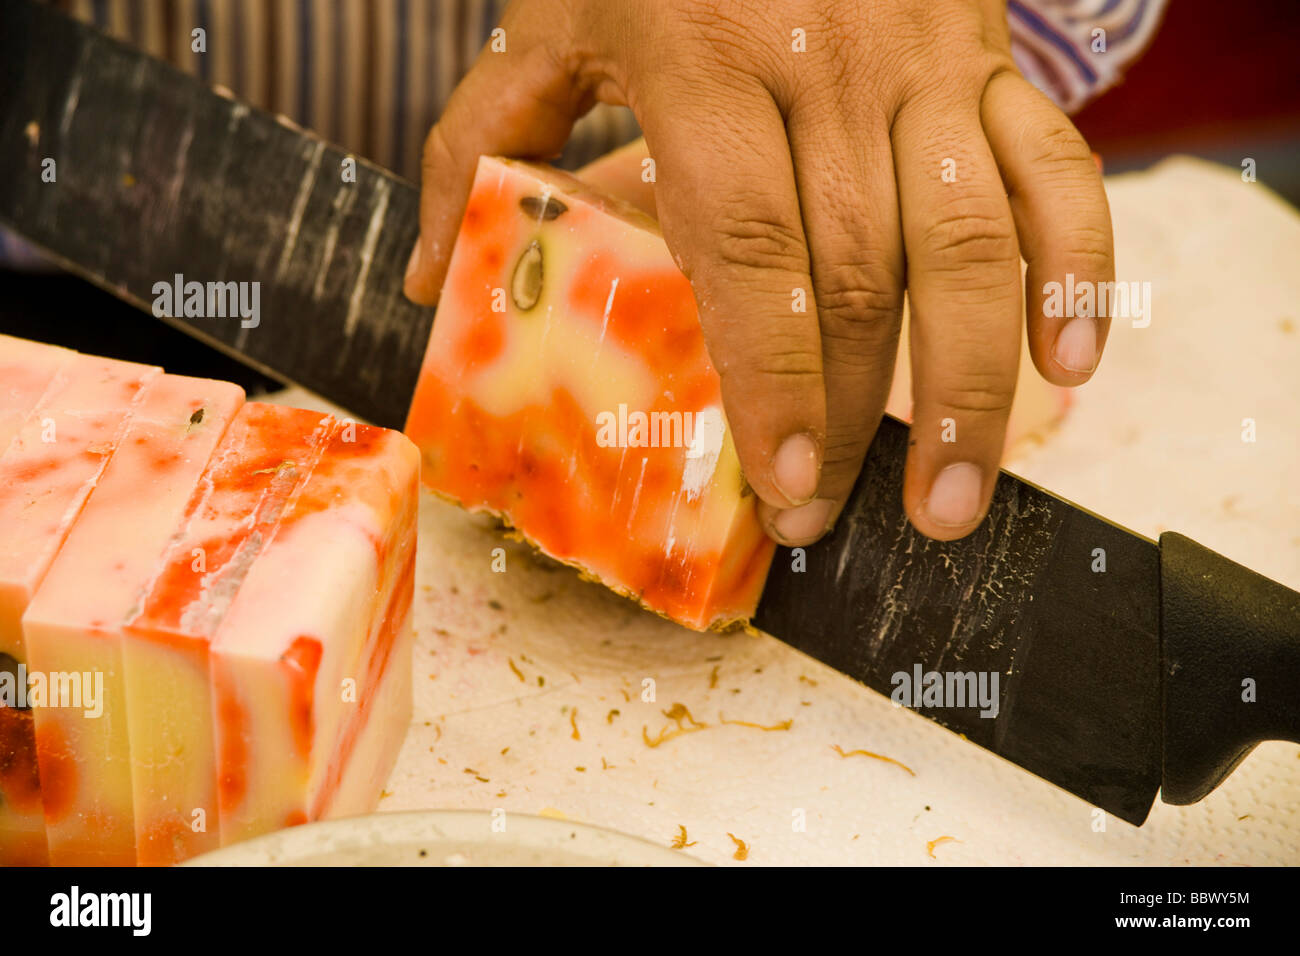 Handmade soaps made from natural raw materials Stock Photo